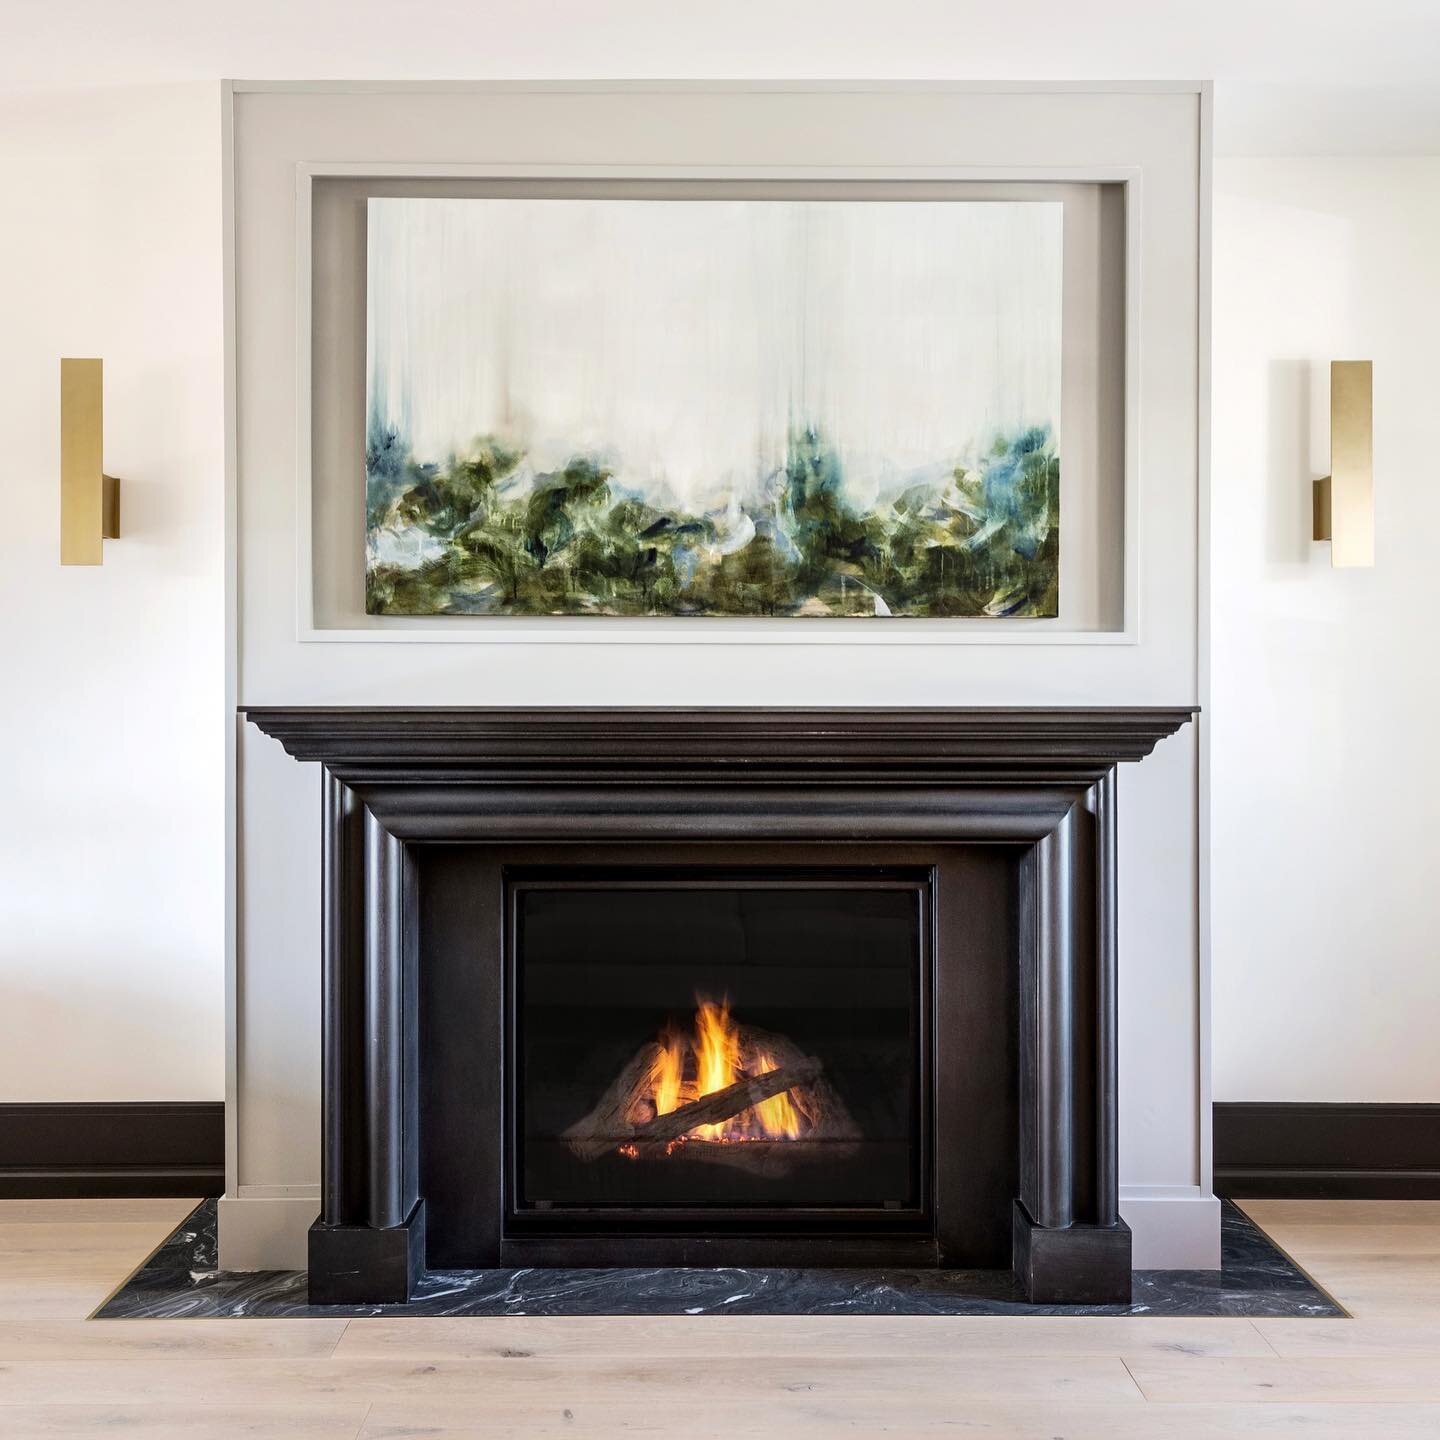 In case you haven&rsquo;t heard, our precast concrete fireplace surrounds are 💯custom! 

Designed by @mangodesignco, this elegant one-piece mantle was cast in our Roma finish 🖤

📸: @photographybymyshsael